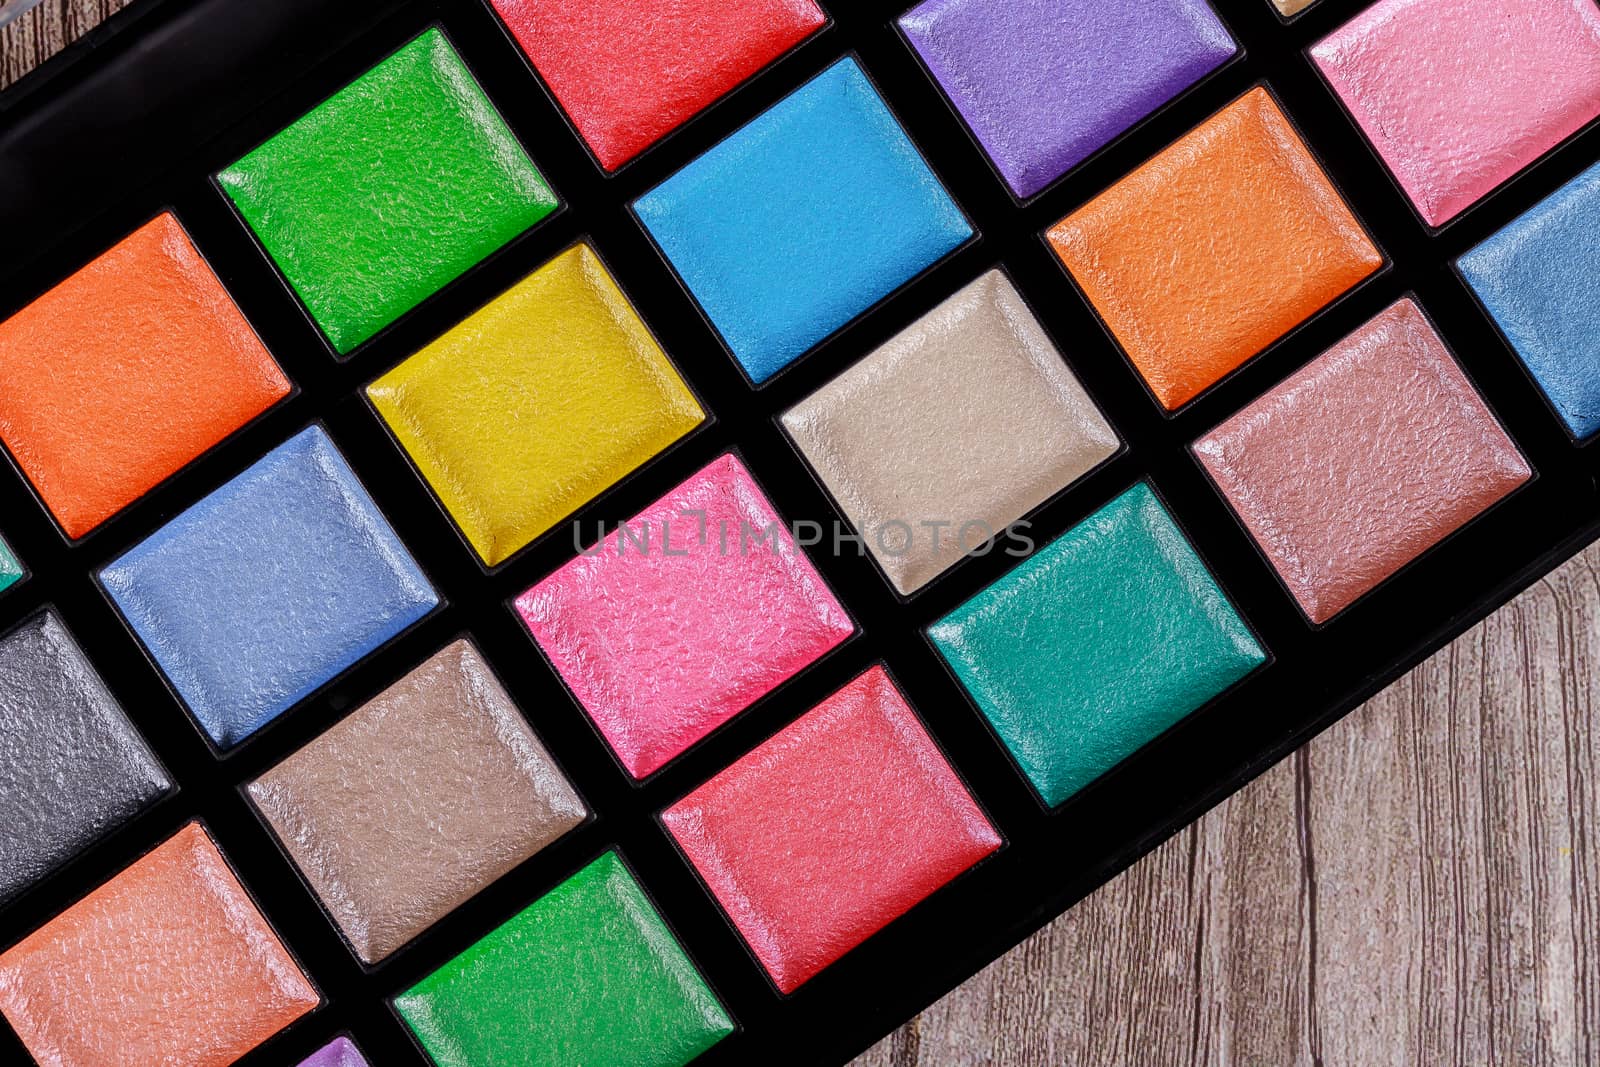 Colorful makeup palette, eye shadow in box. Rectangular shape.